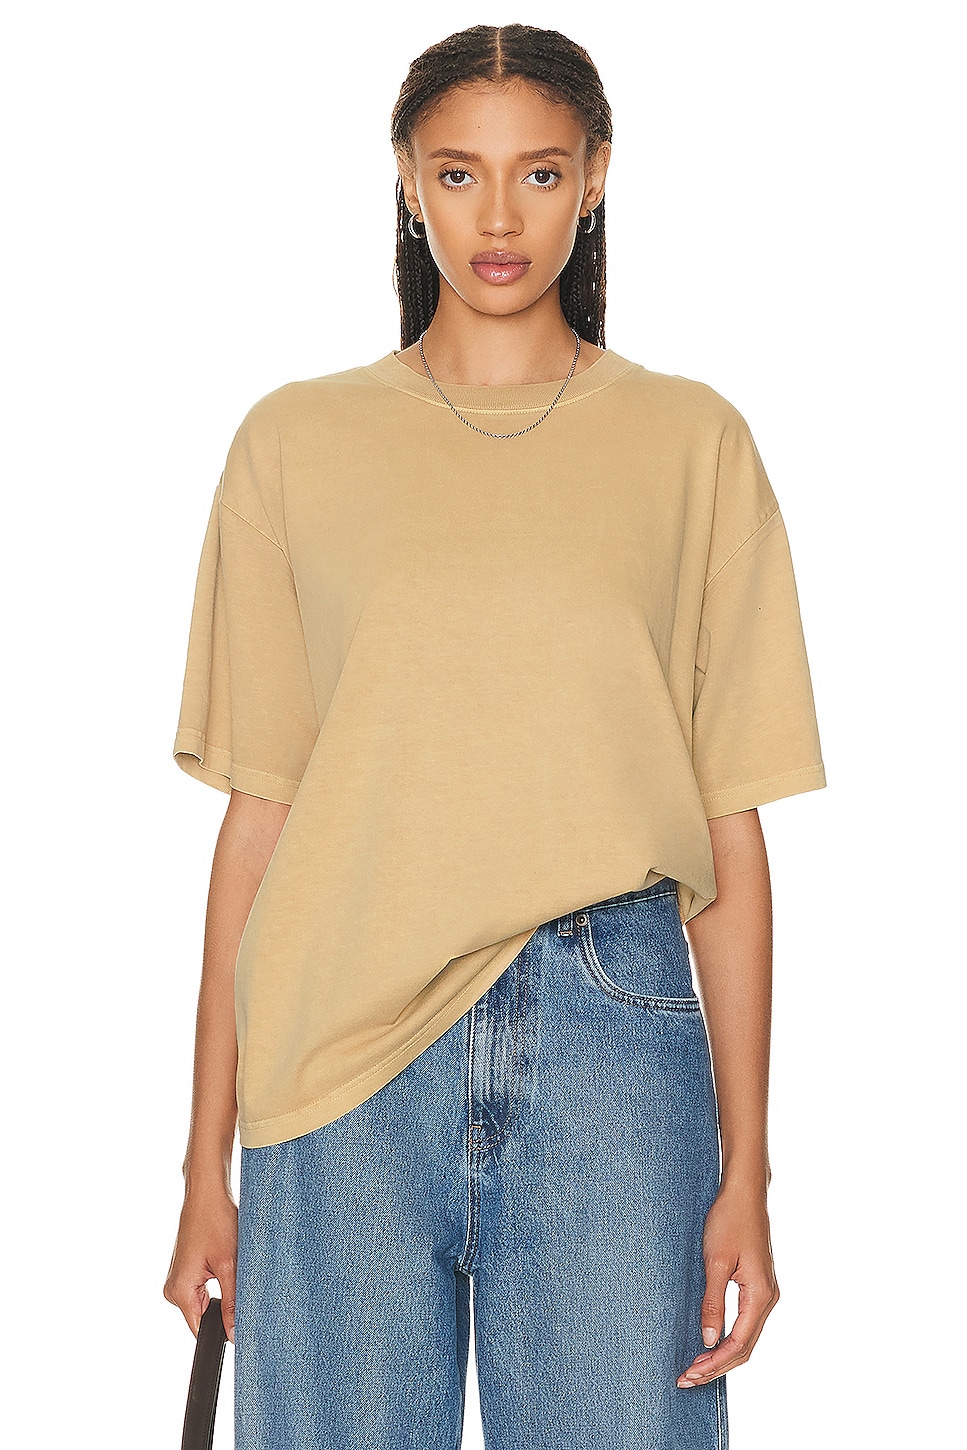 The Relaxed Tee in Tan